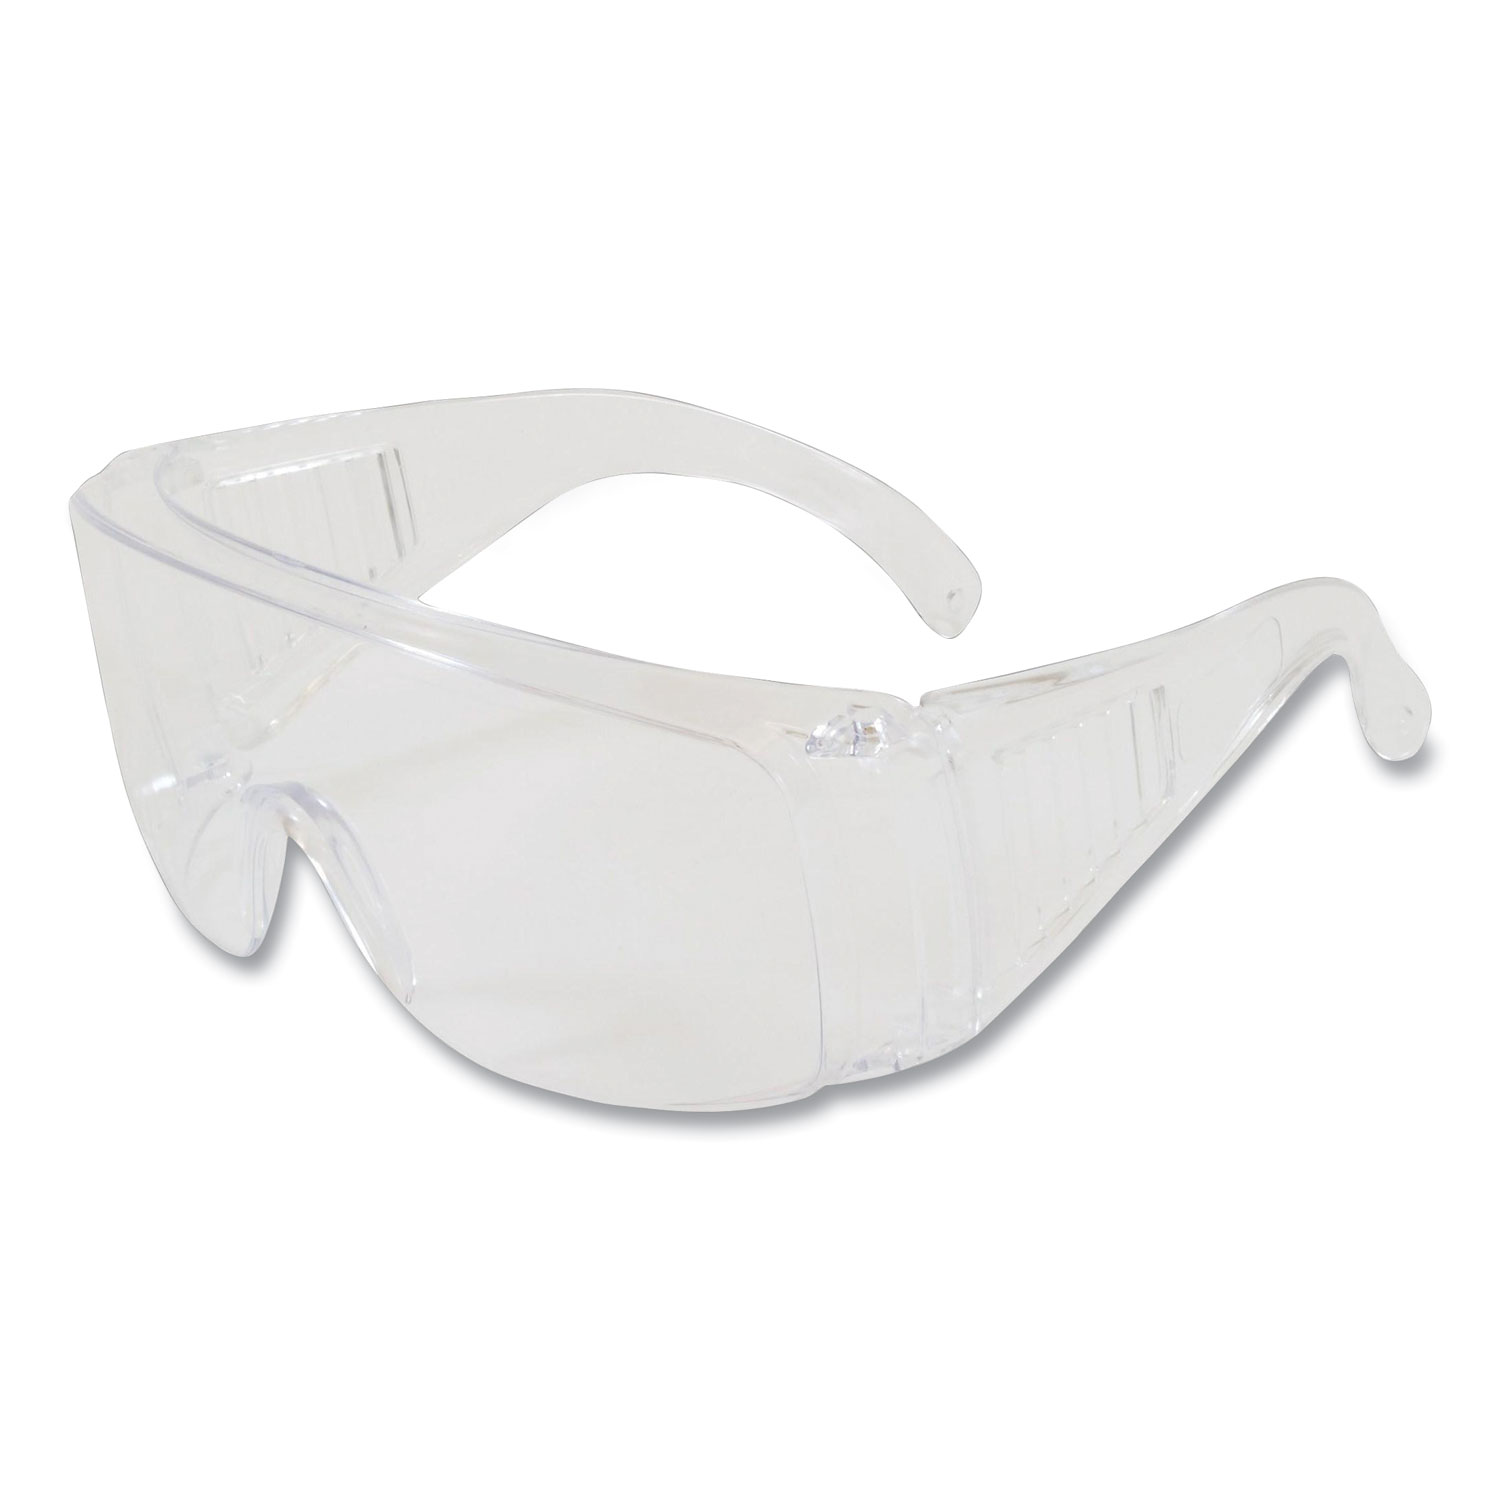  Bouton 250-99-0980 The Scout Polycarbonate Safety Glasses, Clear Lens (PID177128) 